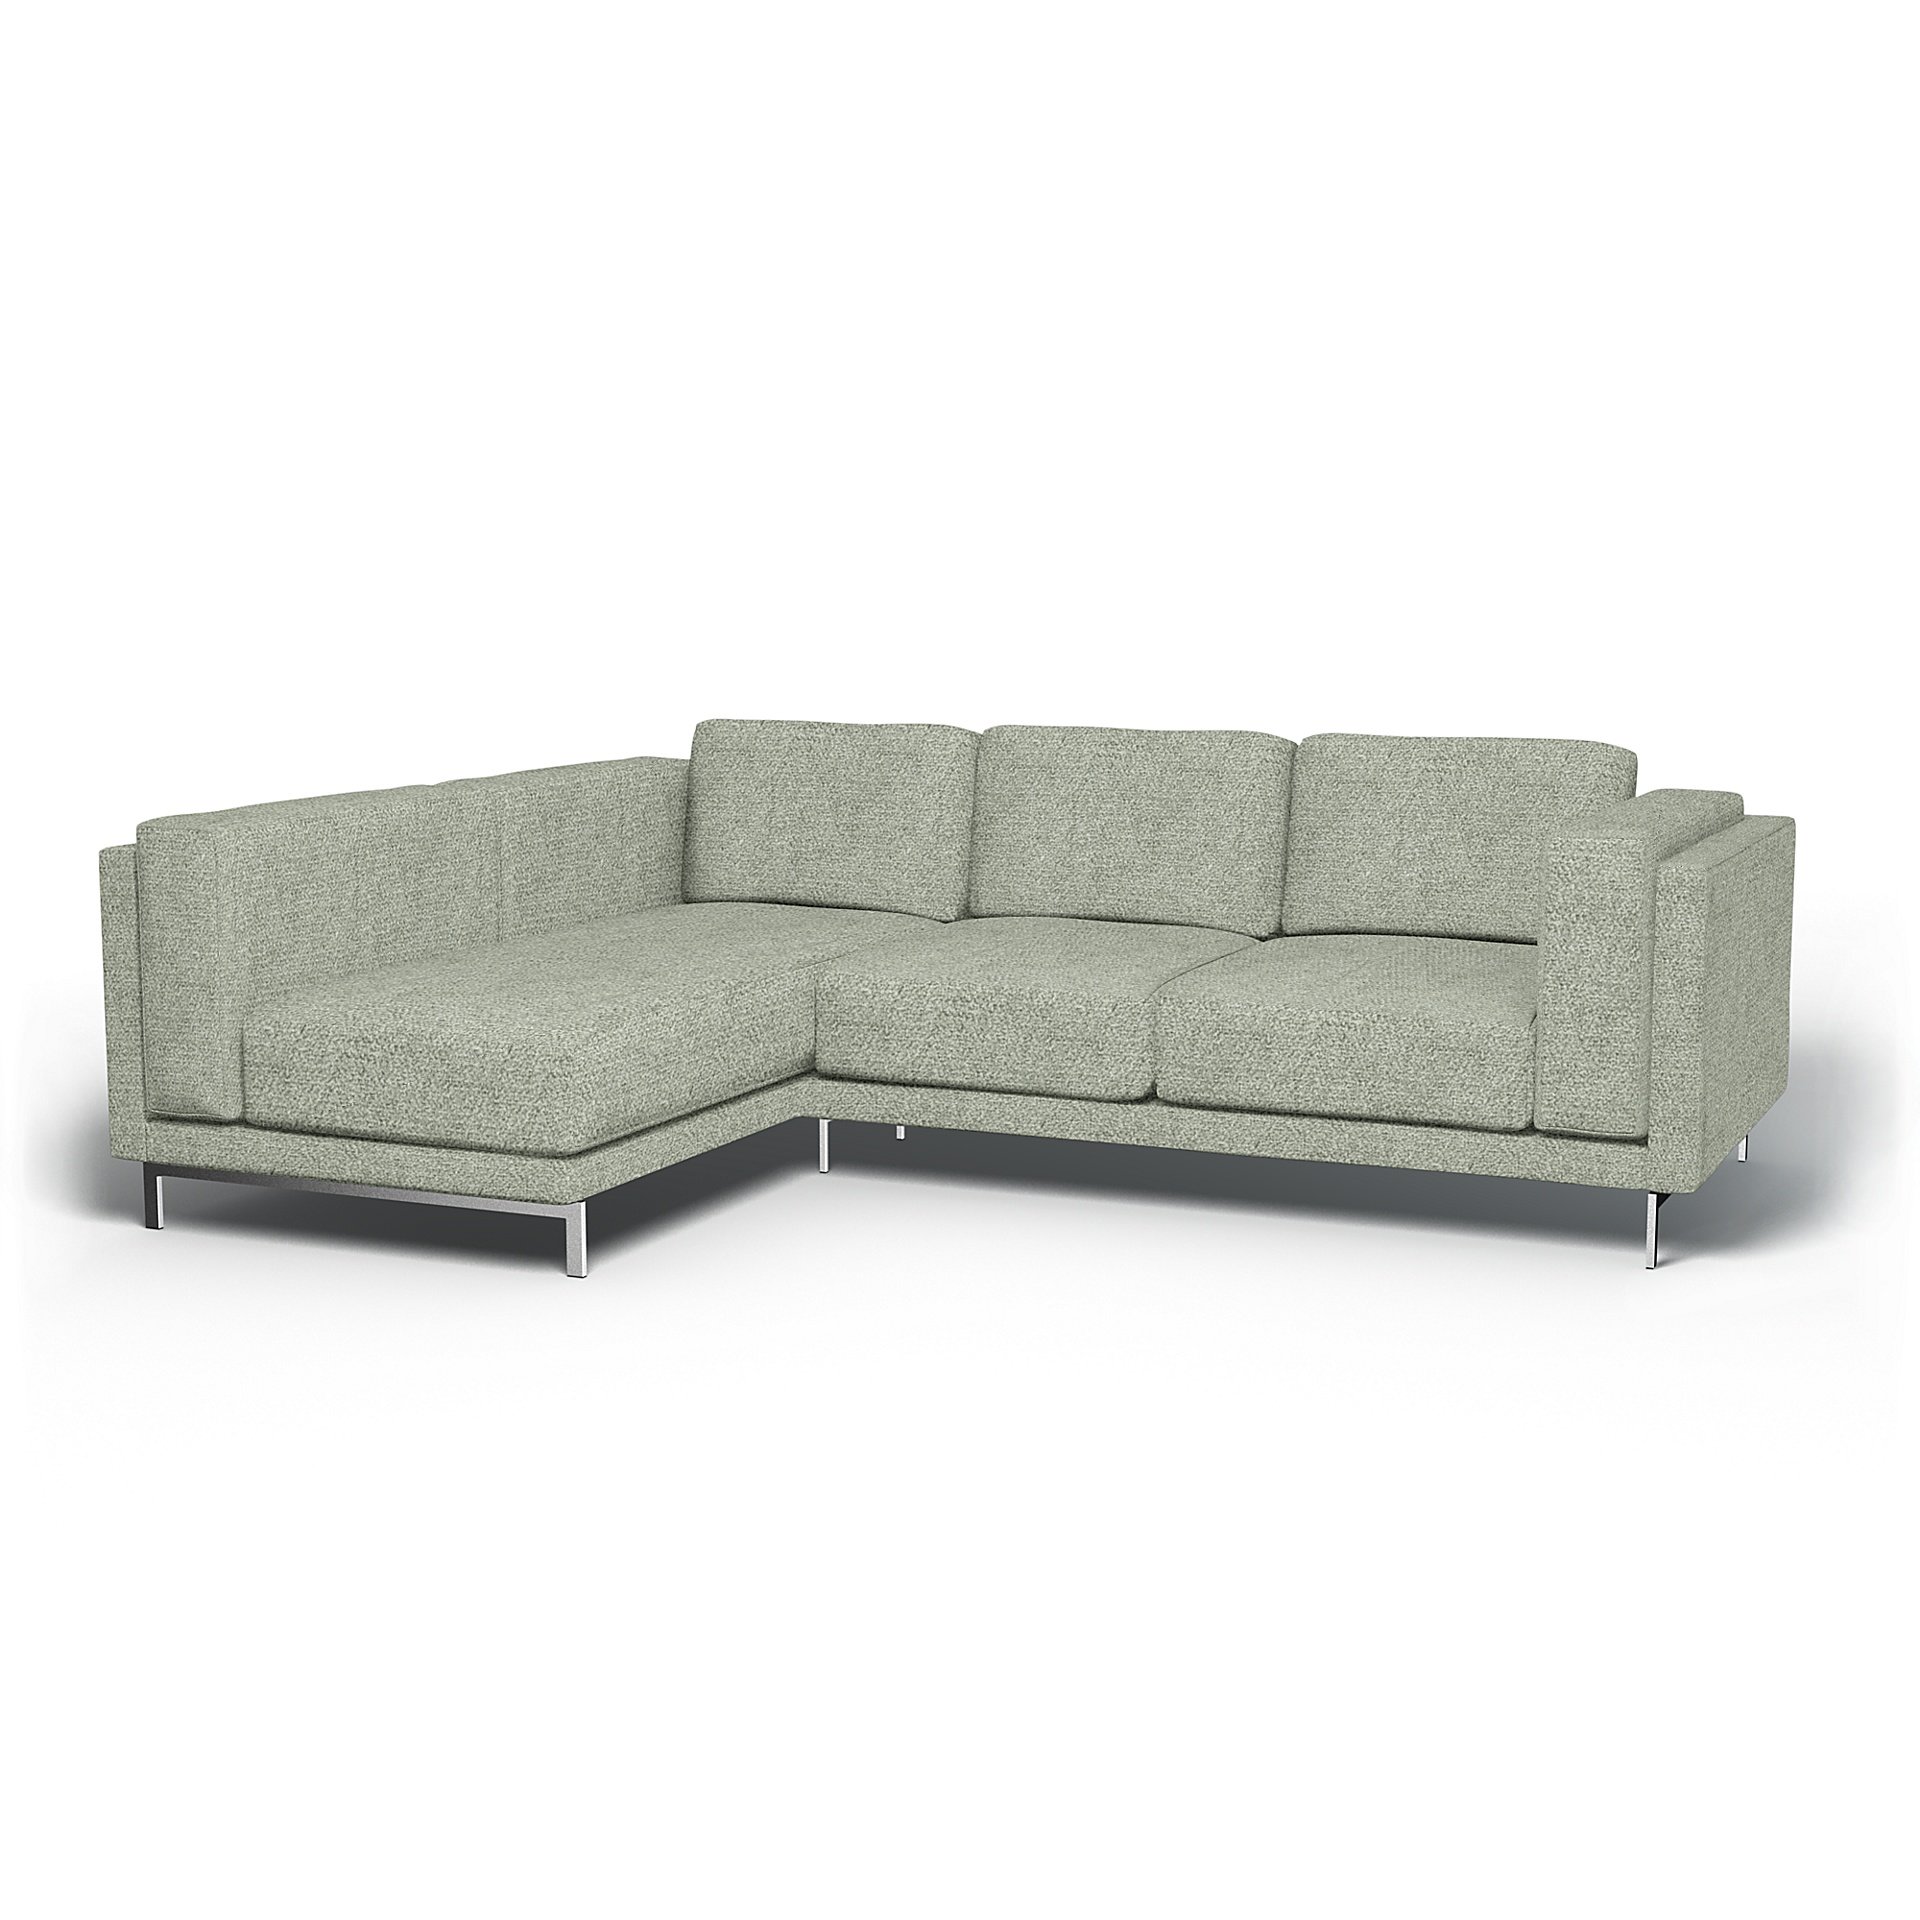 IKEA - Nockeby 3 Seater Sofa with Left Chaise Cover, Pistachio, Boucle & Texture - Bemz